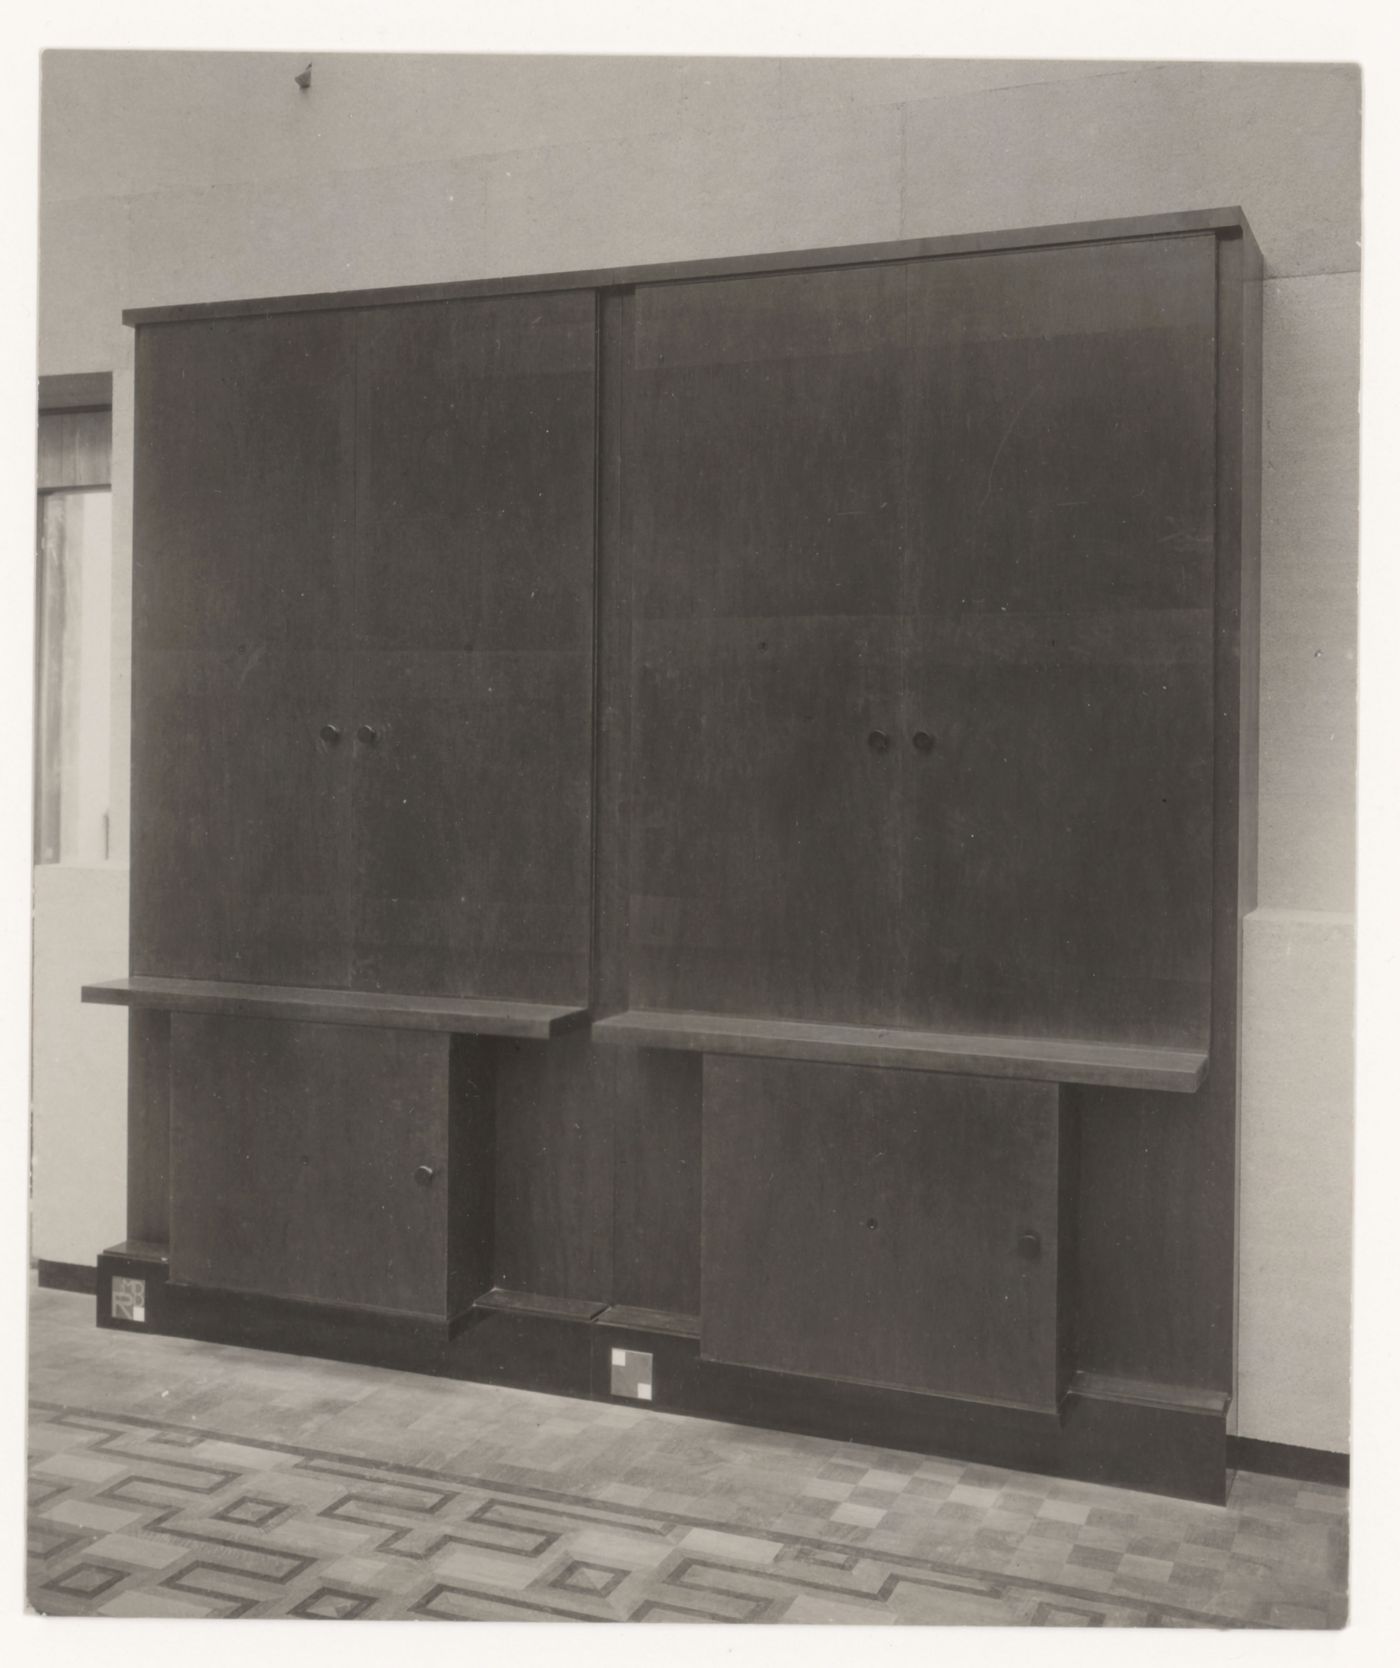 View of a wood cabinet designed by J.J.P. Oud for museum Boymans, Rotterdam, Netherlands